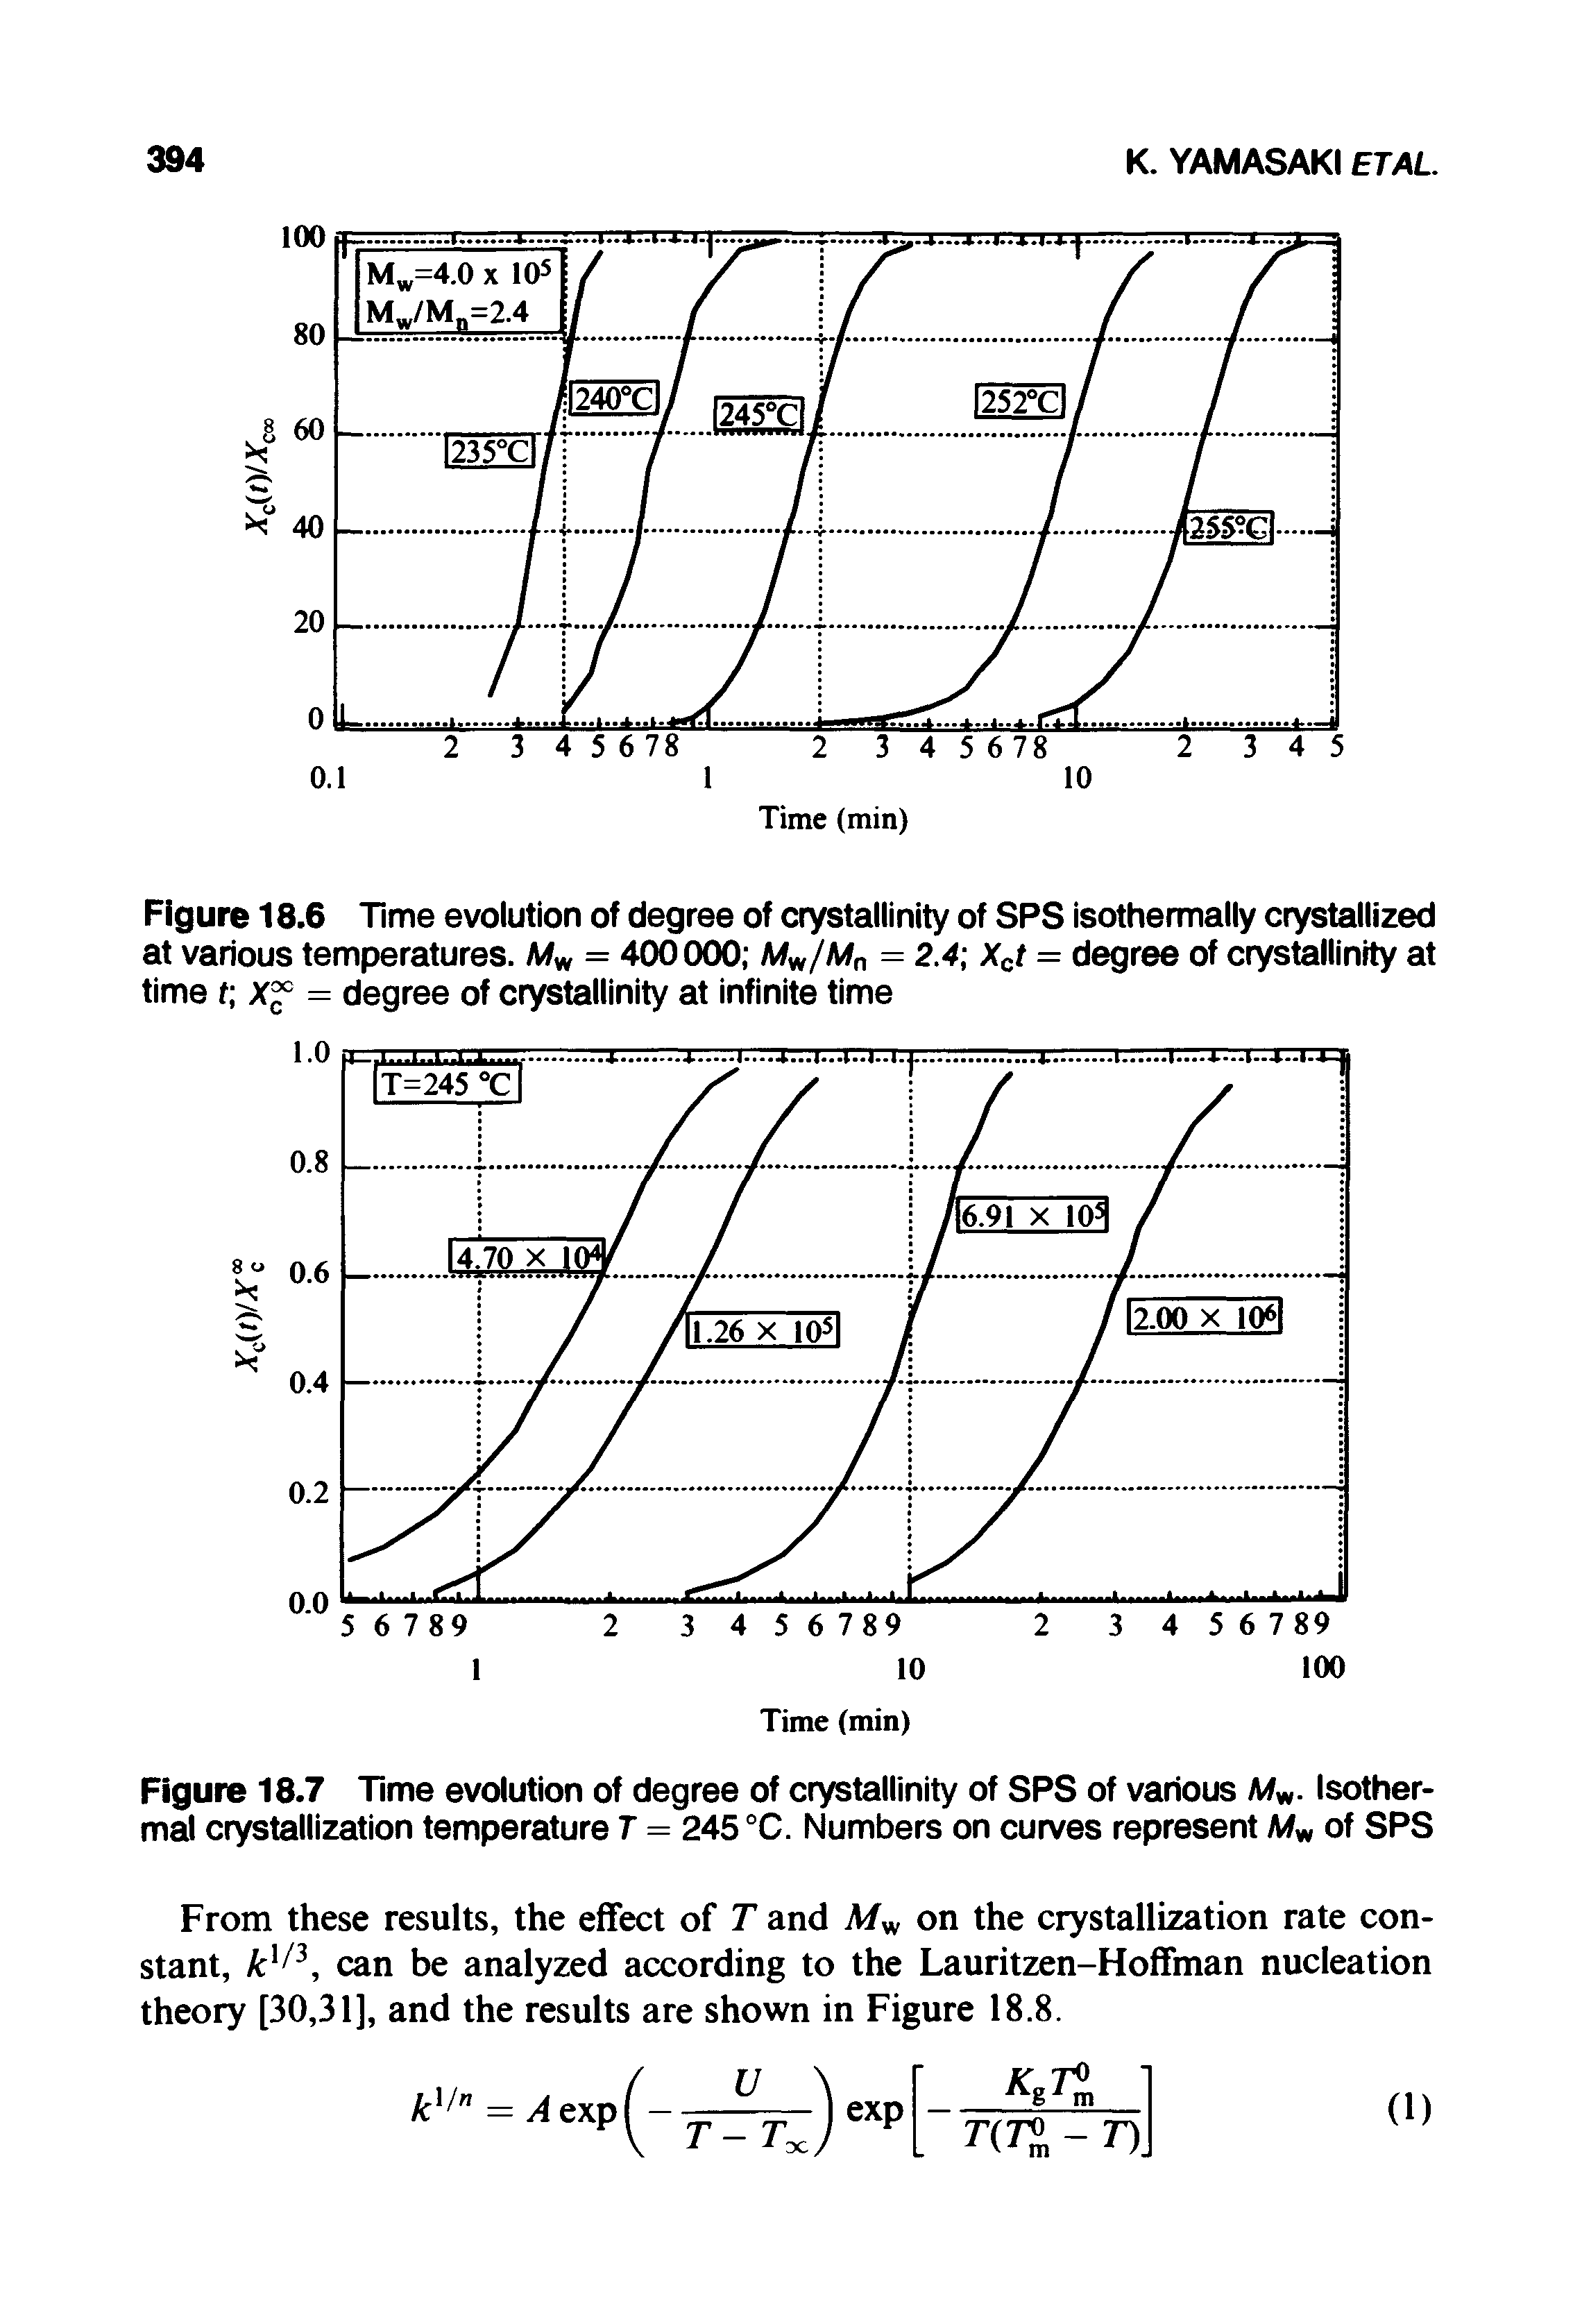 Figure 18.7 Time evolution of degree of crystallinity of SPS of various Mw. Isothermal crystallization temperature T = 245 °C. Numbers on curves represent M of SPS...